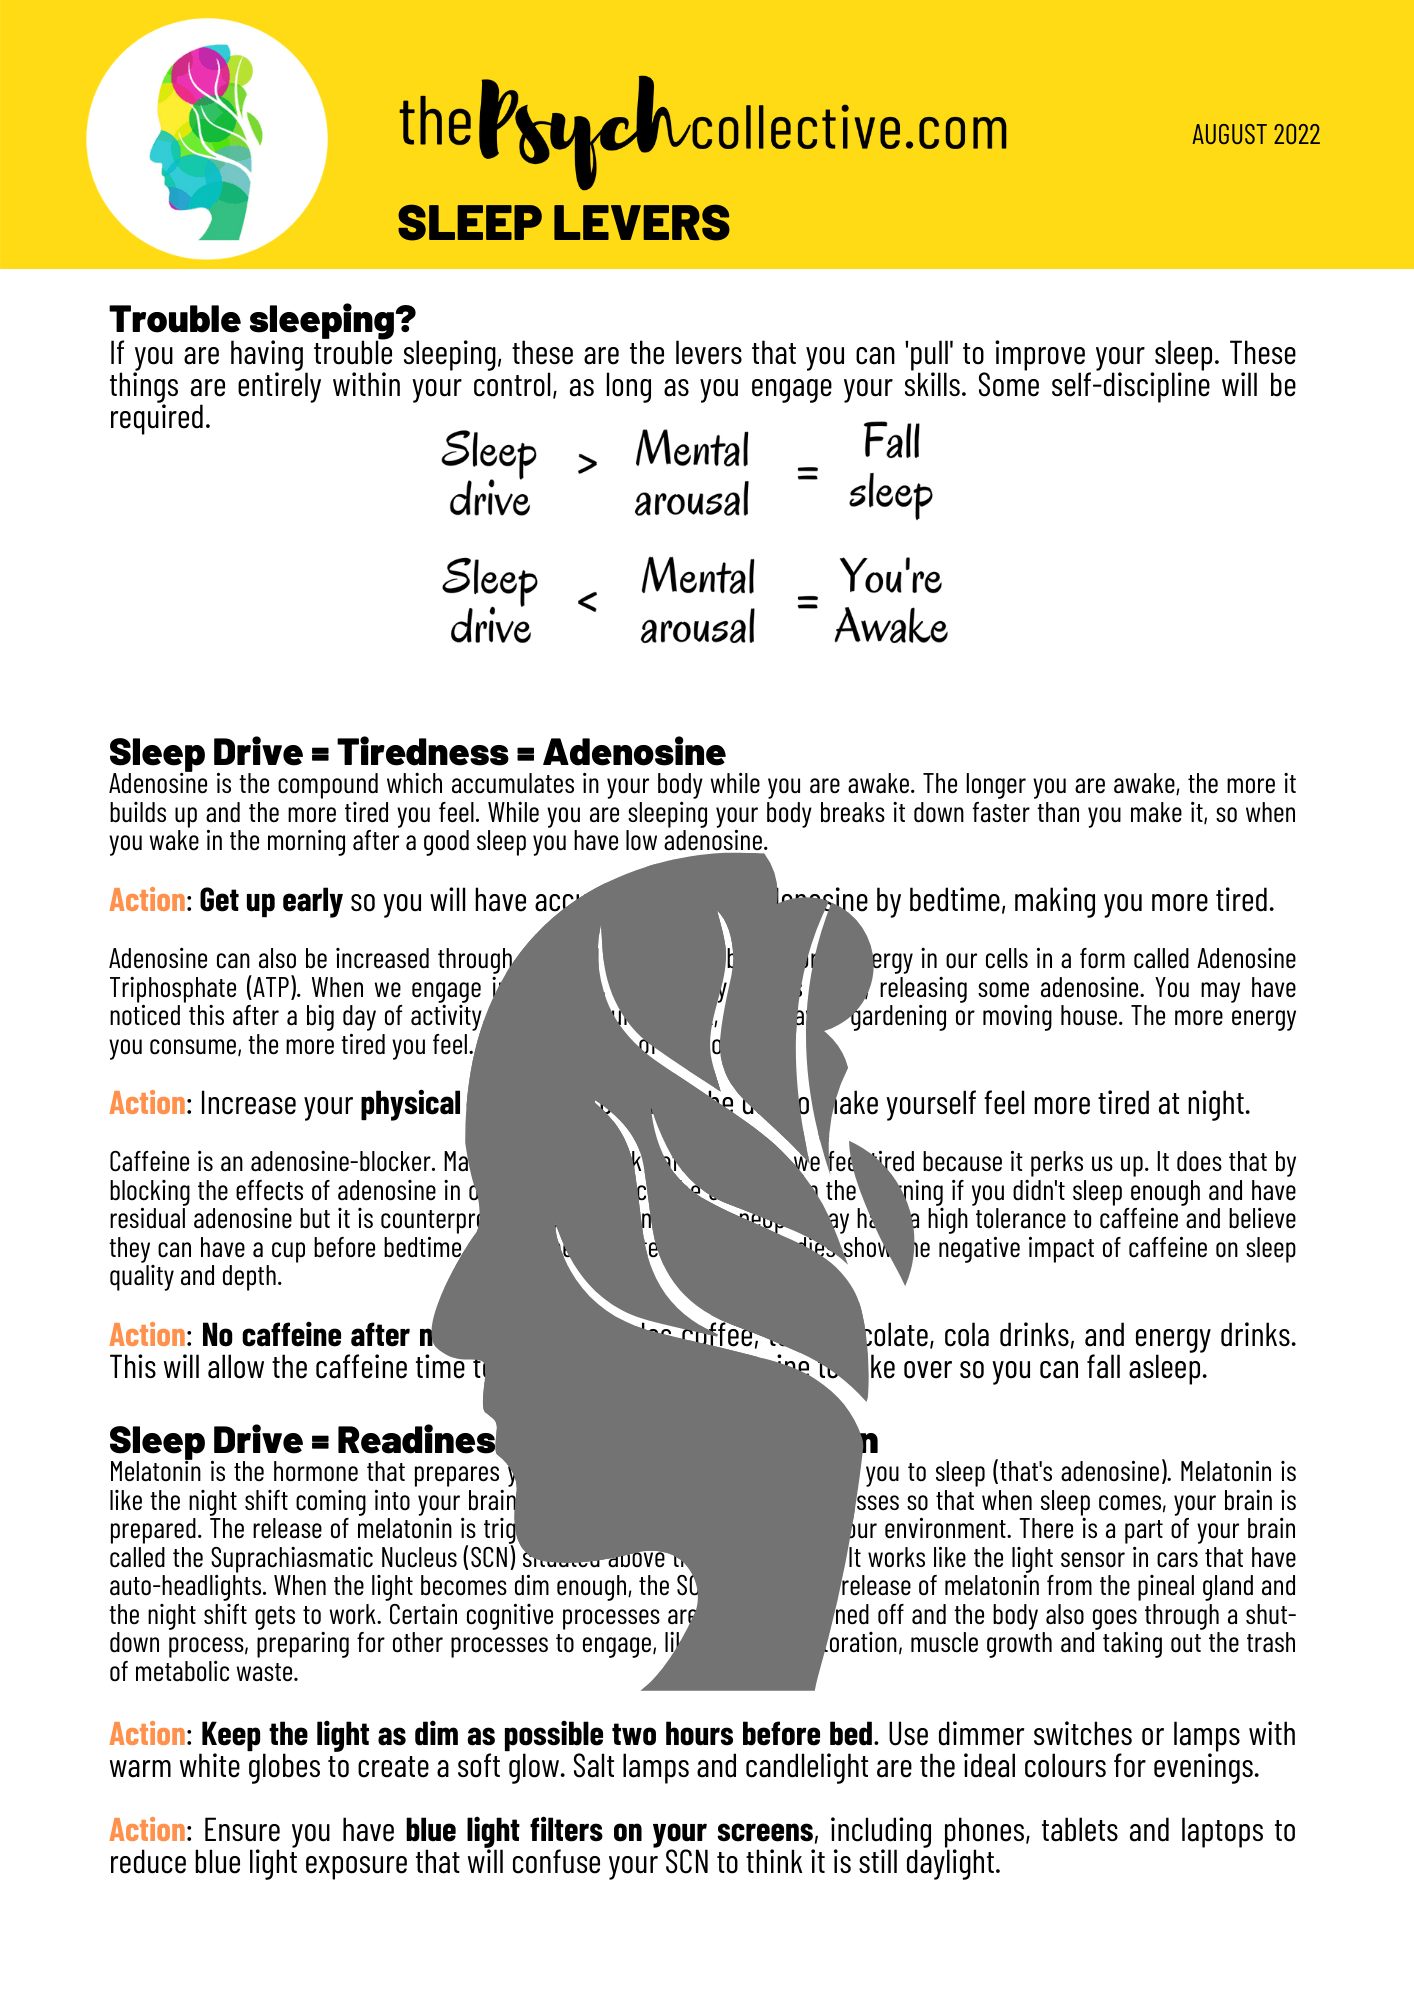 sleep lever handout from The Psych Collective